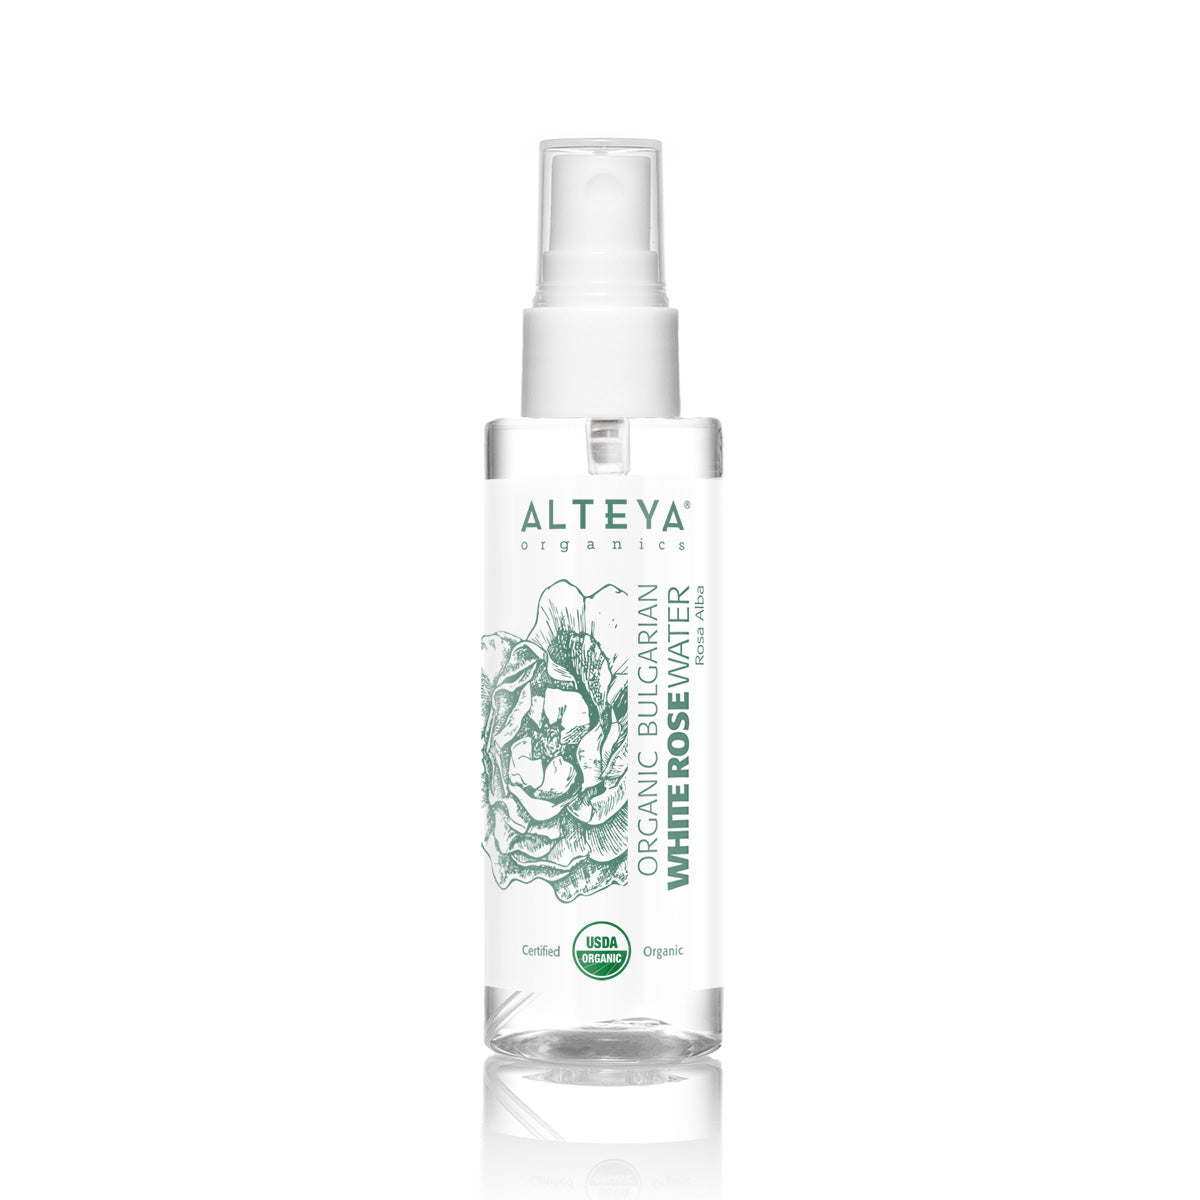 A bottle of Alteya Organics Organic Bulgarian White Rose Water (Rosa Alba) 3.4 Fl Oz spray, suitable for all skin and hair types. Infused with the gentle essence of white rose water, this refreshing mist is made from natural.